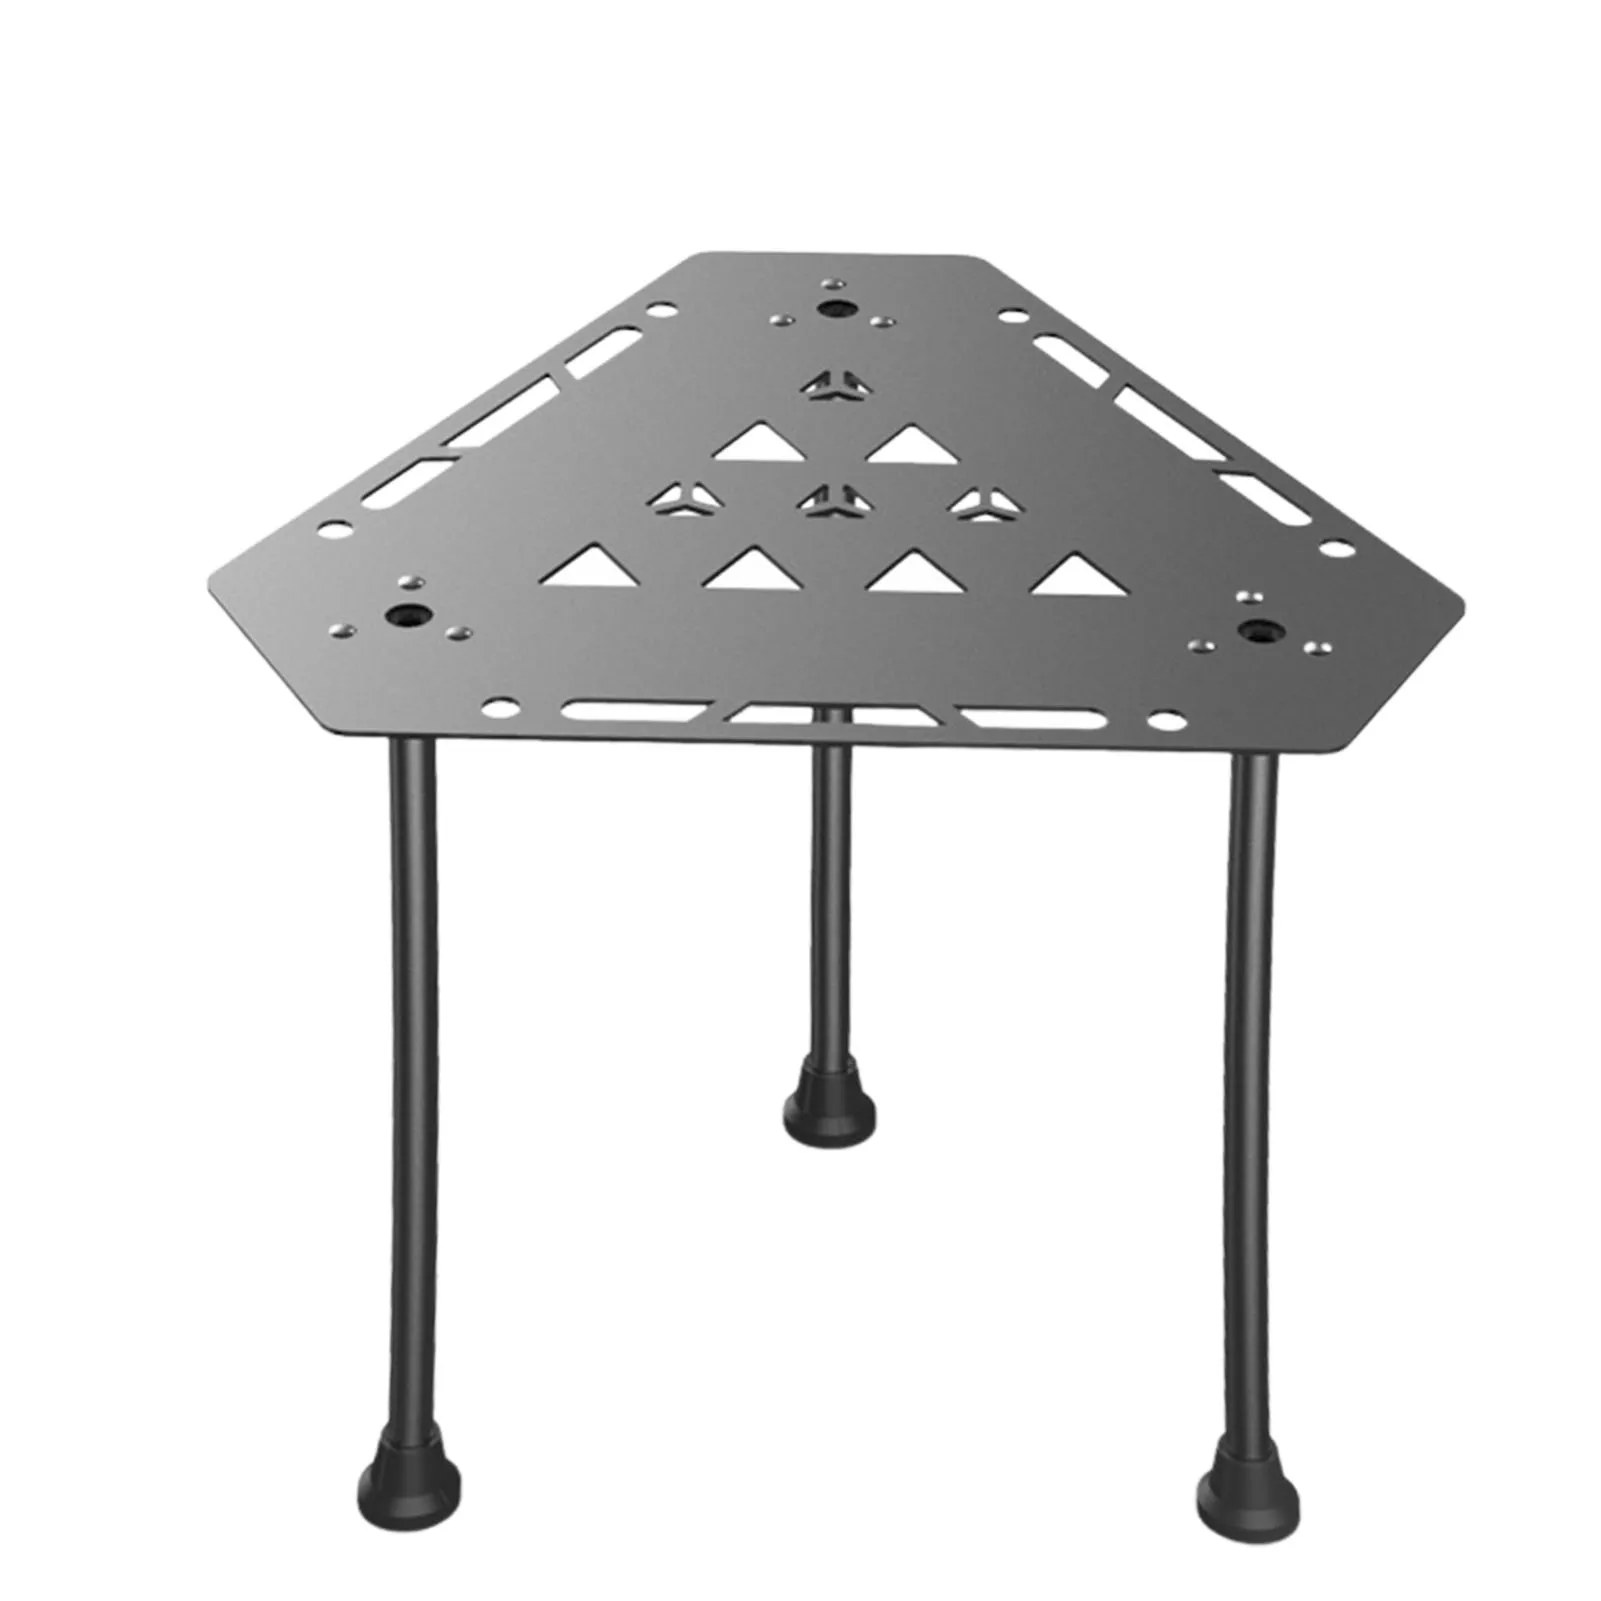 

Outdoor Picnics Folding Camping Table Multi-Functional Splicing Folding Triangle Tables For Outdoors Suitable For Garden Party